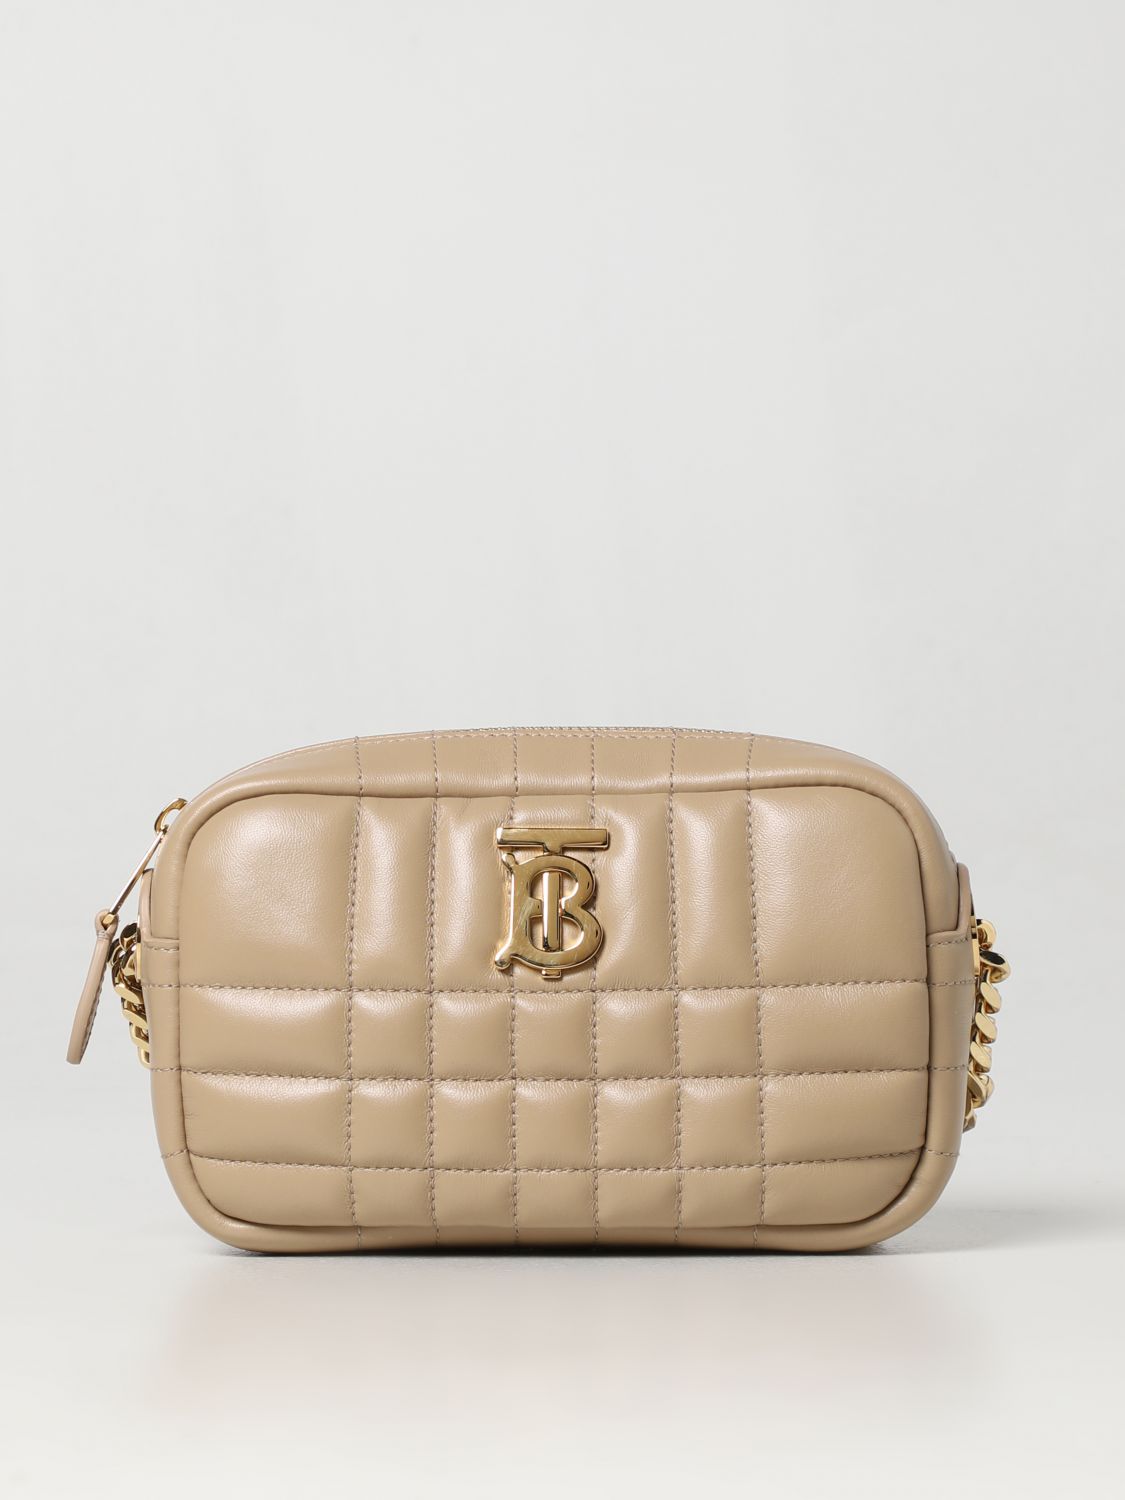 BURBERRY: Lola bag in quilted leather - Black  Burberry mini bag 8060836  online at